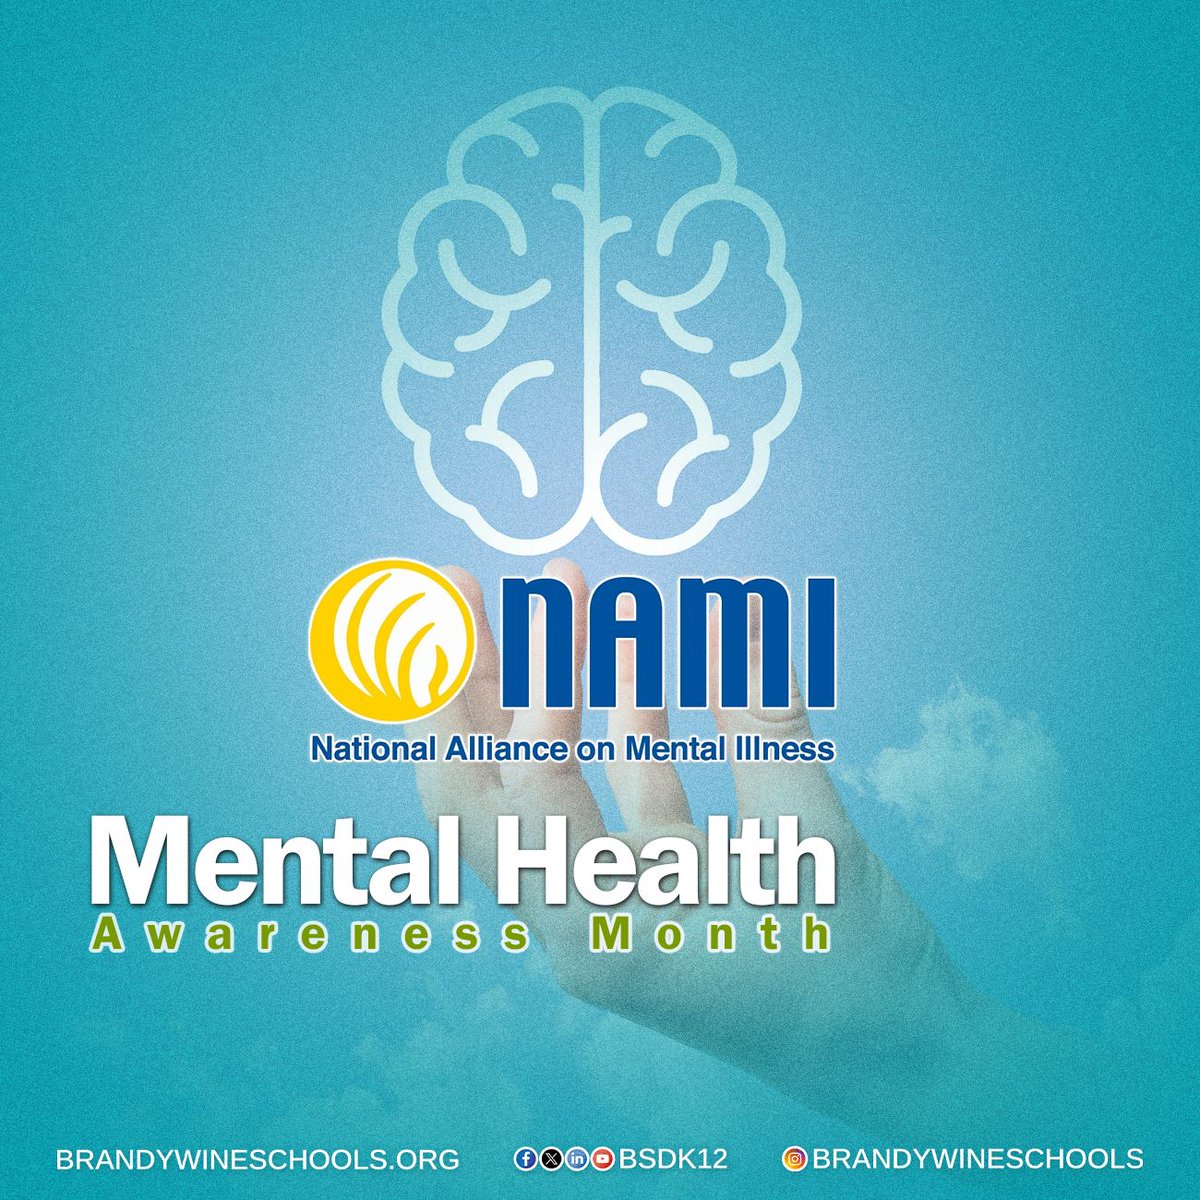 May is Mental Health Awareness Month. Mental health is just as important as physical health. This month, the National Alliance on Mental Health (NAMI) seeks to raise awareness about mental health & the importance of taking care of emotional well-being. #TakeAMentalHealthMoment